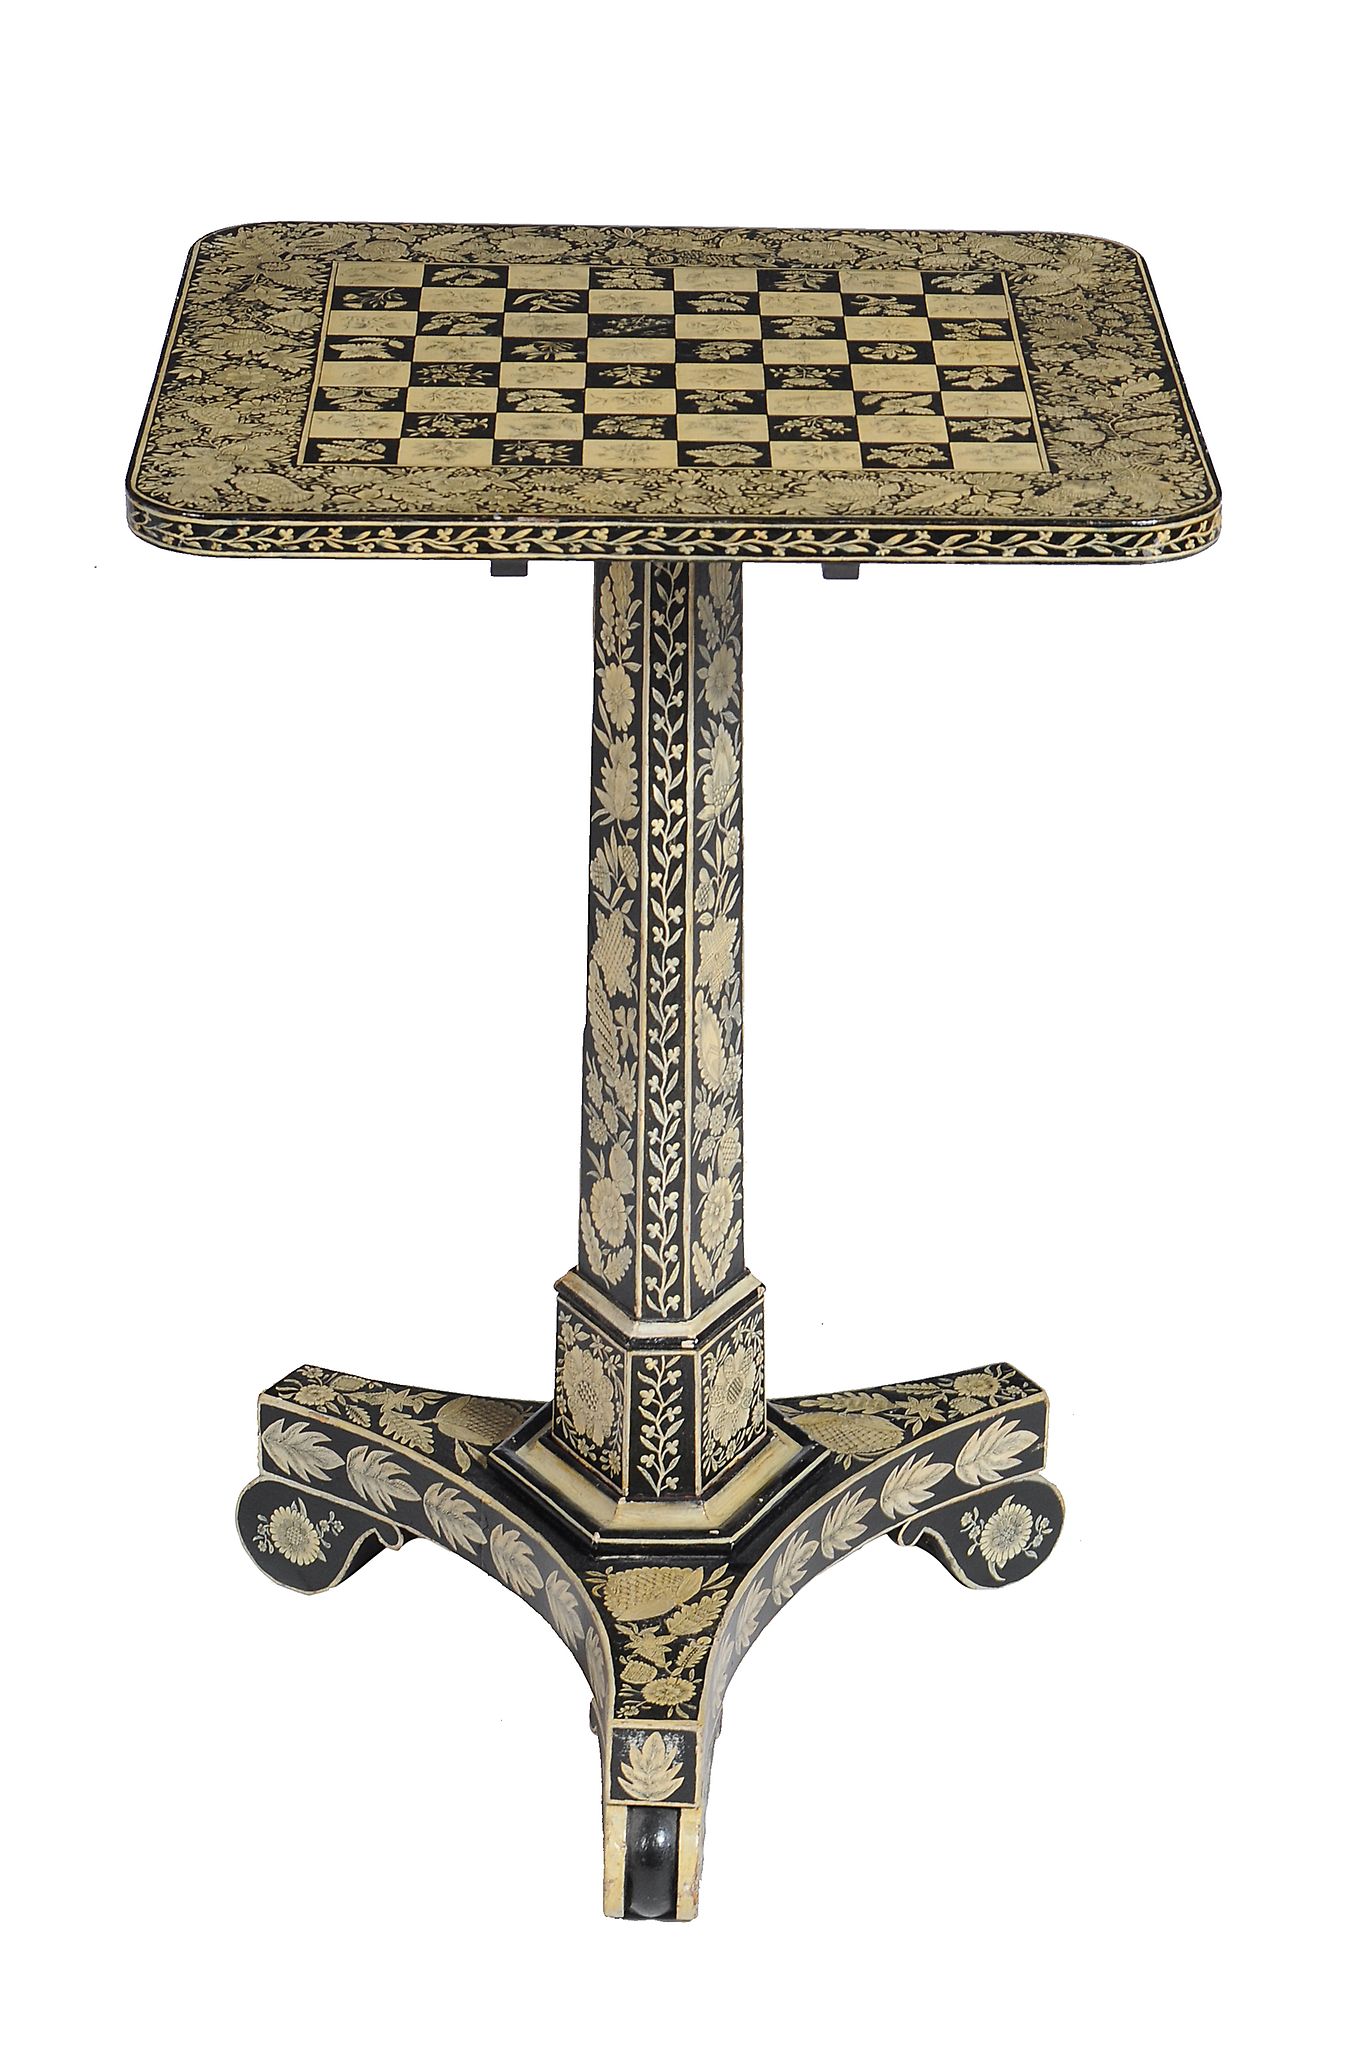 A painted games table in early 19th century style , 20th century, inspired by the Vizagapatam type,